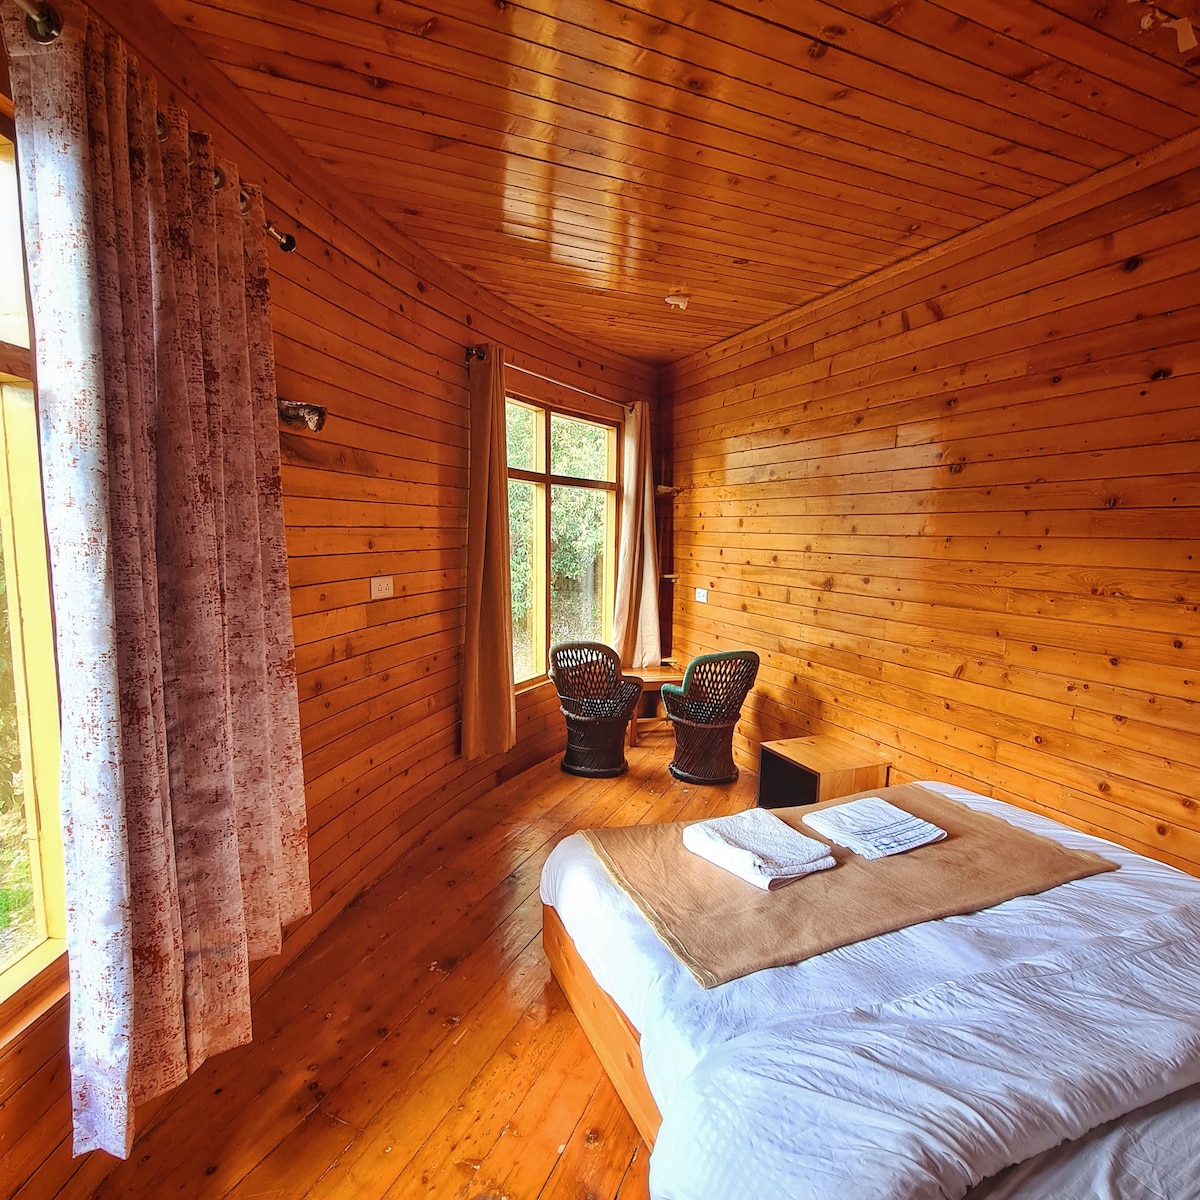 Wooden room with nature view at 6900ft.